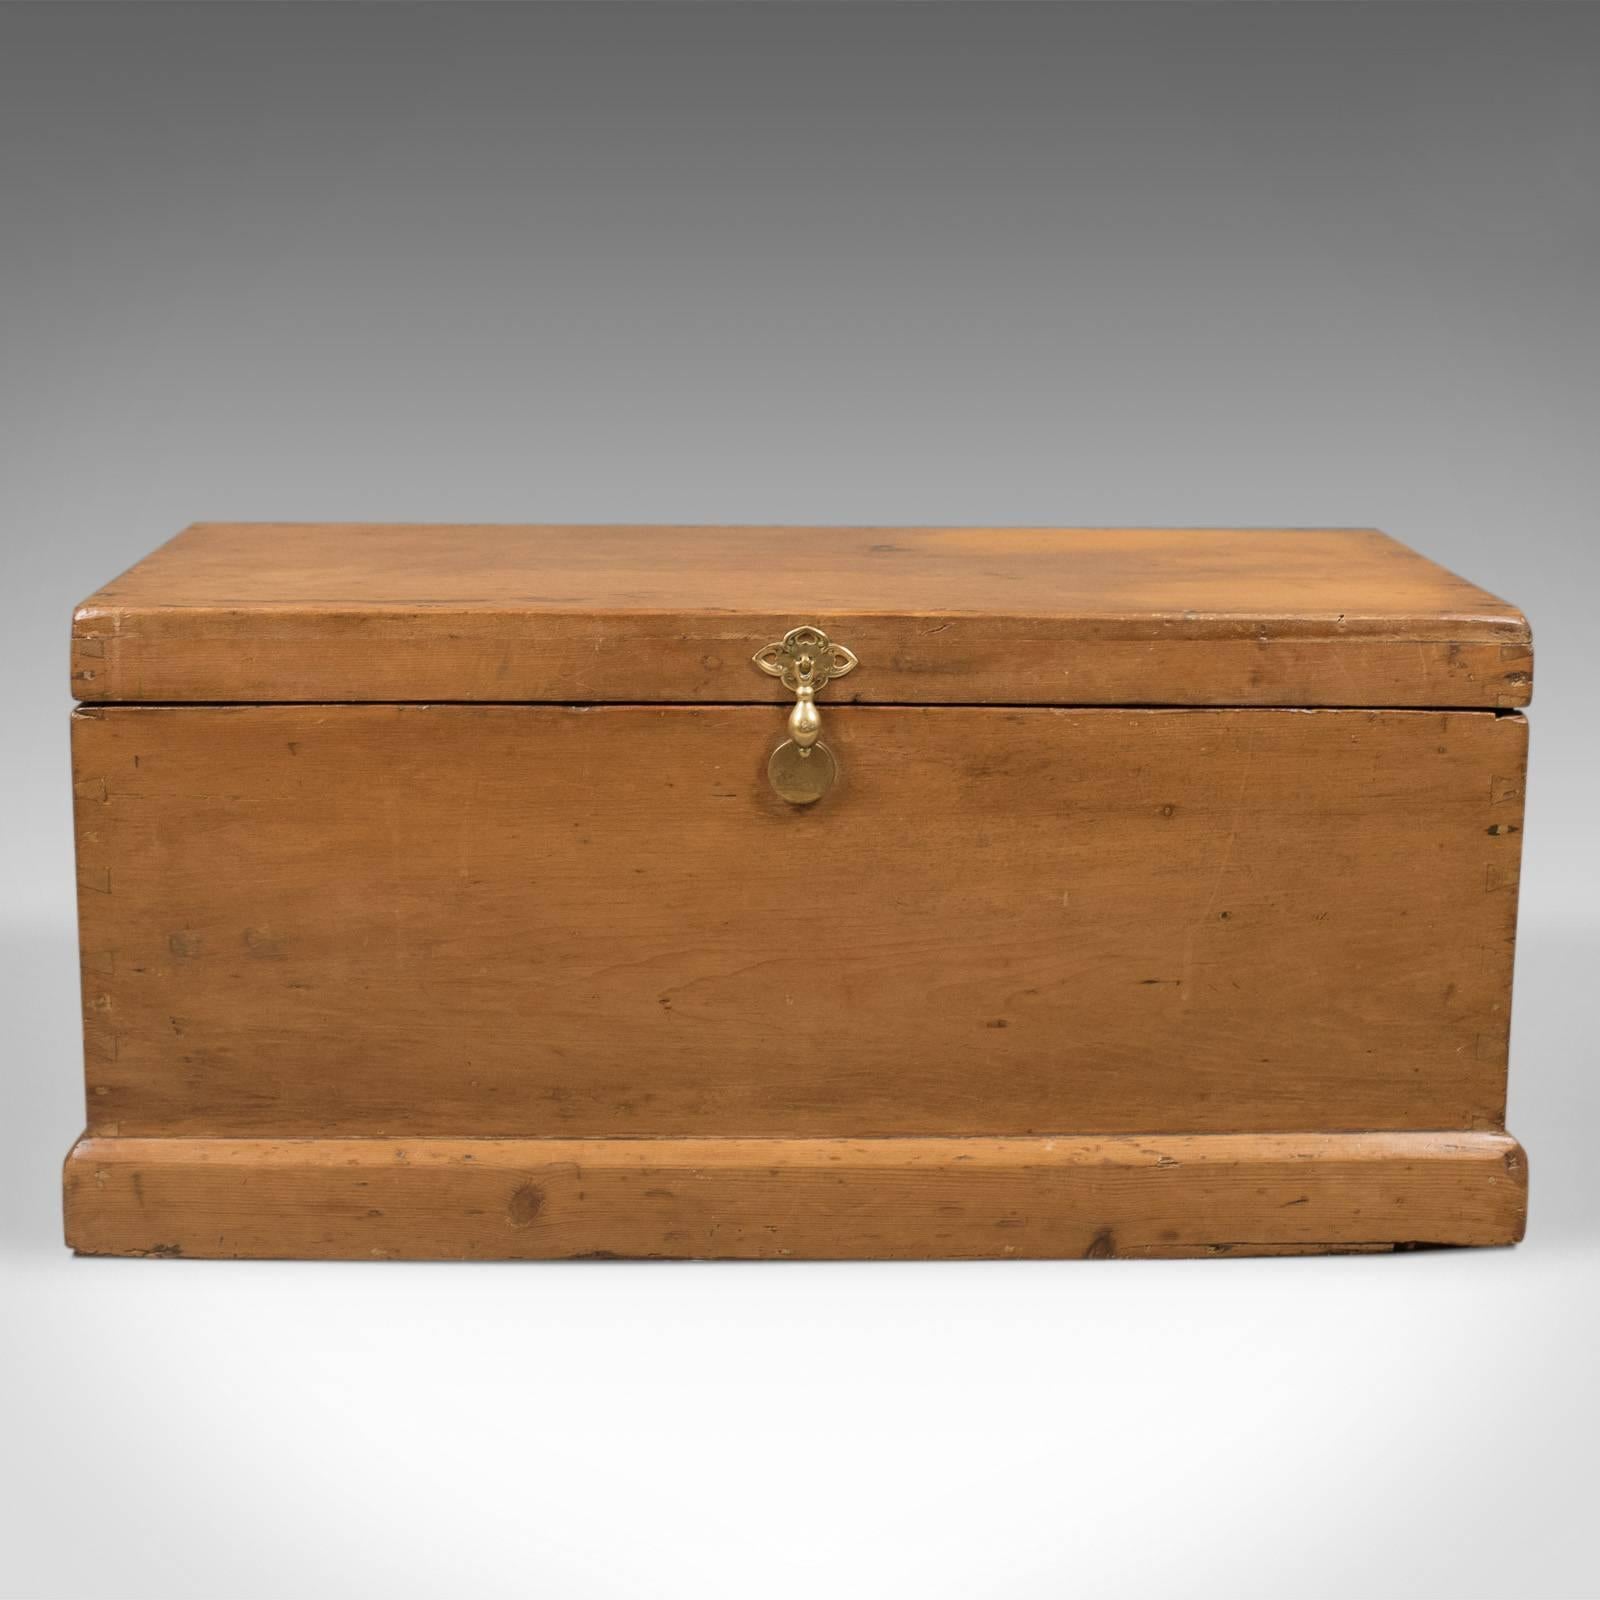 This is a mid Victorian antique pine trunk, an English carriage chest dating to circa 1860.

Attractive butterscotch hues to the waxed pine
A charming piece with desirable aged patina

Solid brass pendant handle over pierced brass quatrefoil